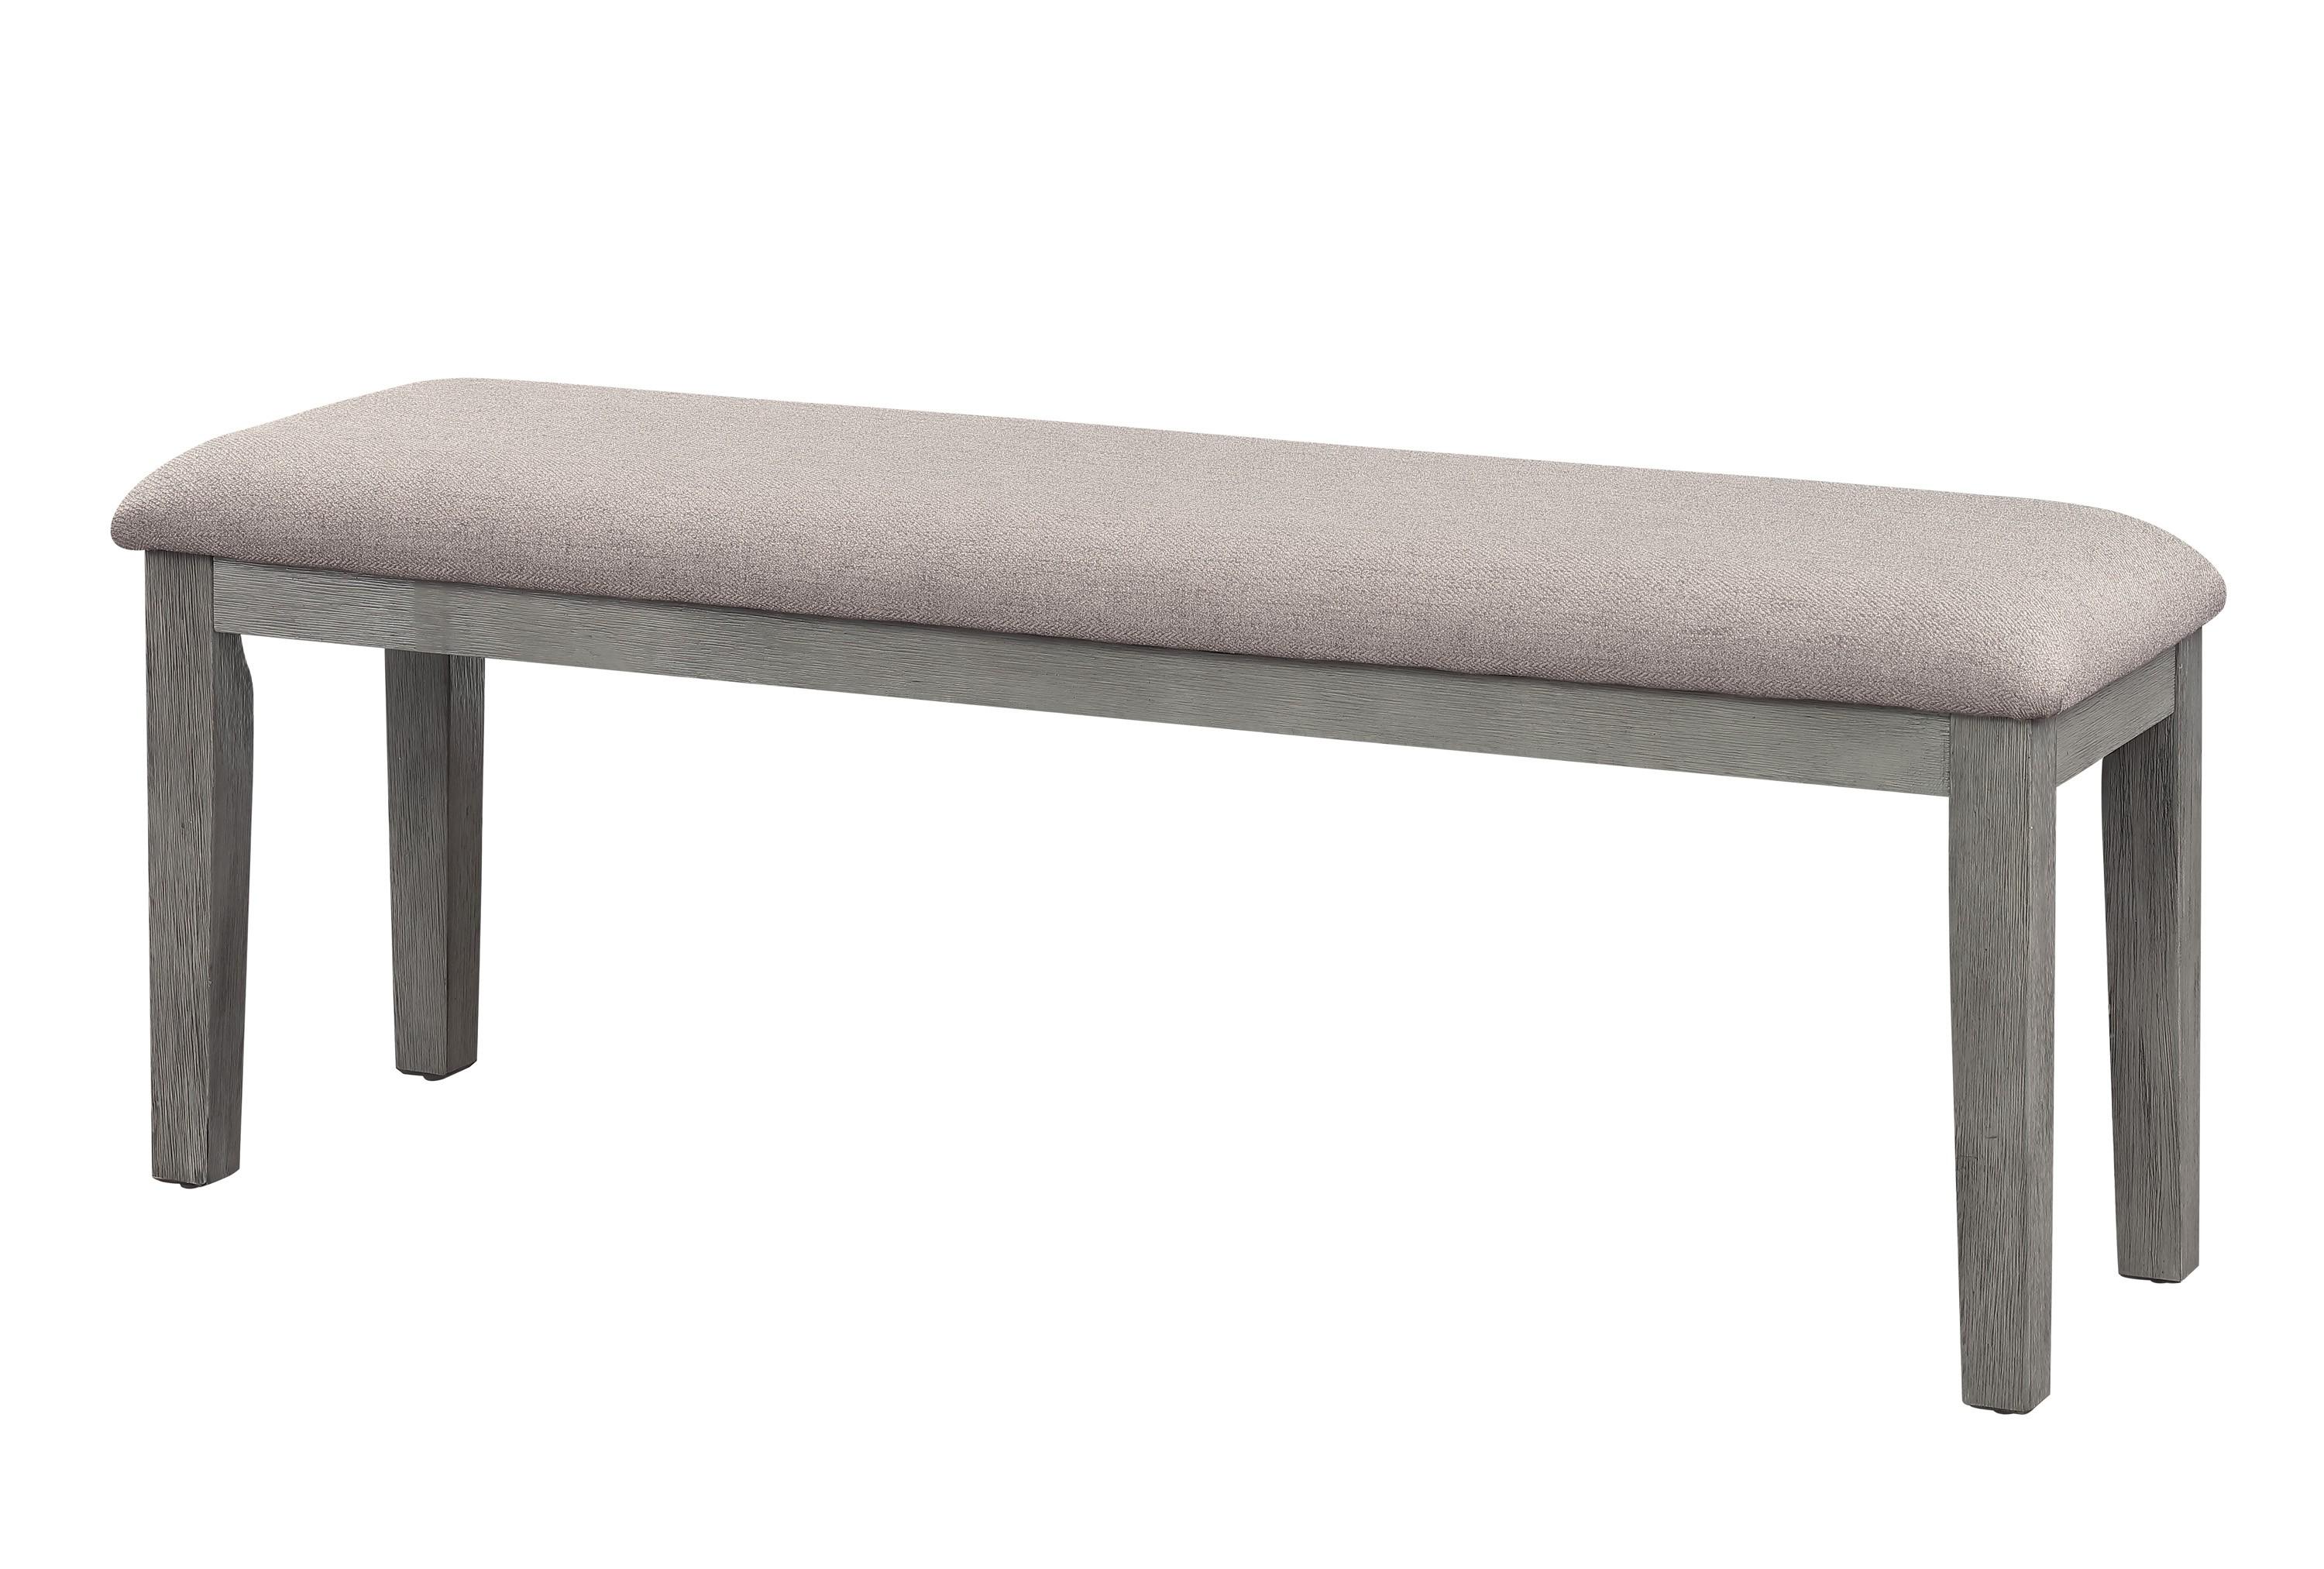 Transitional Bench 5706GY-13 Armhurst 5706GY-13 in Gray Polyester